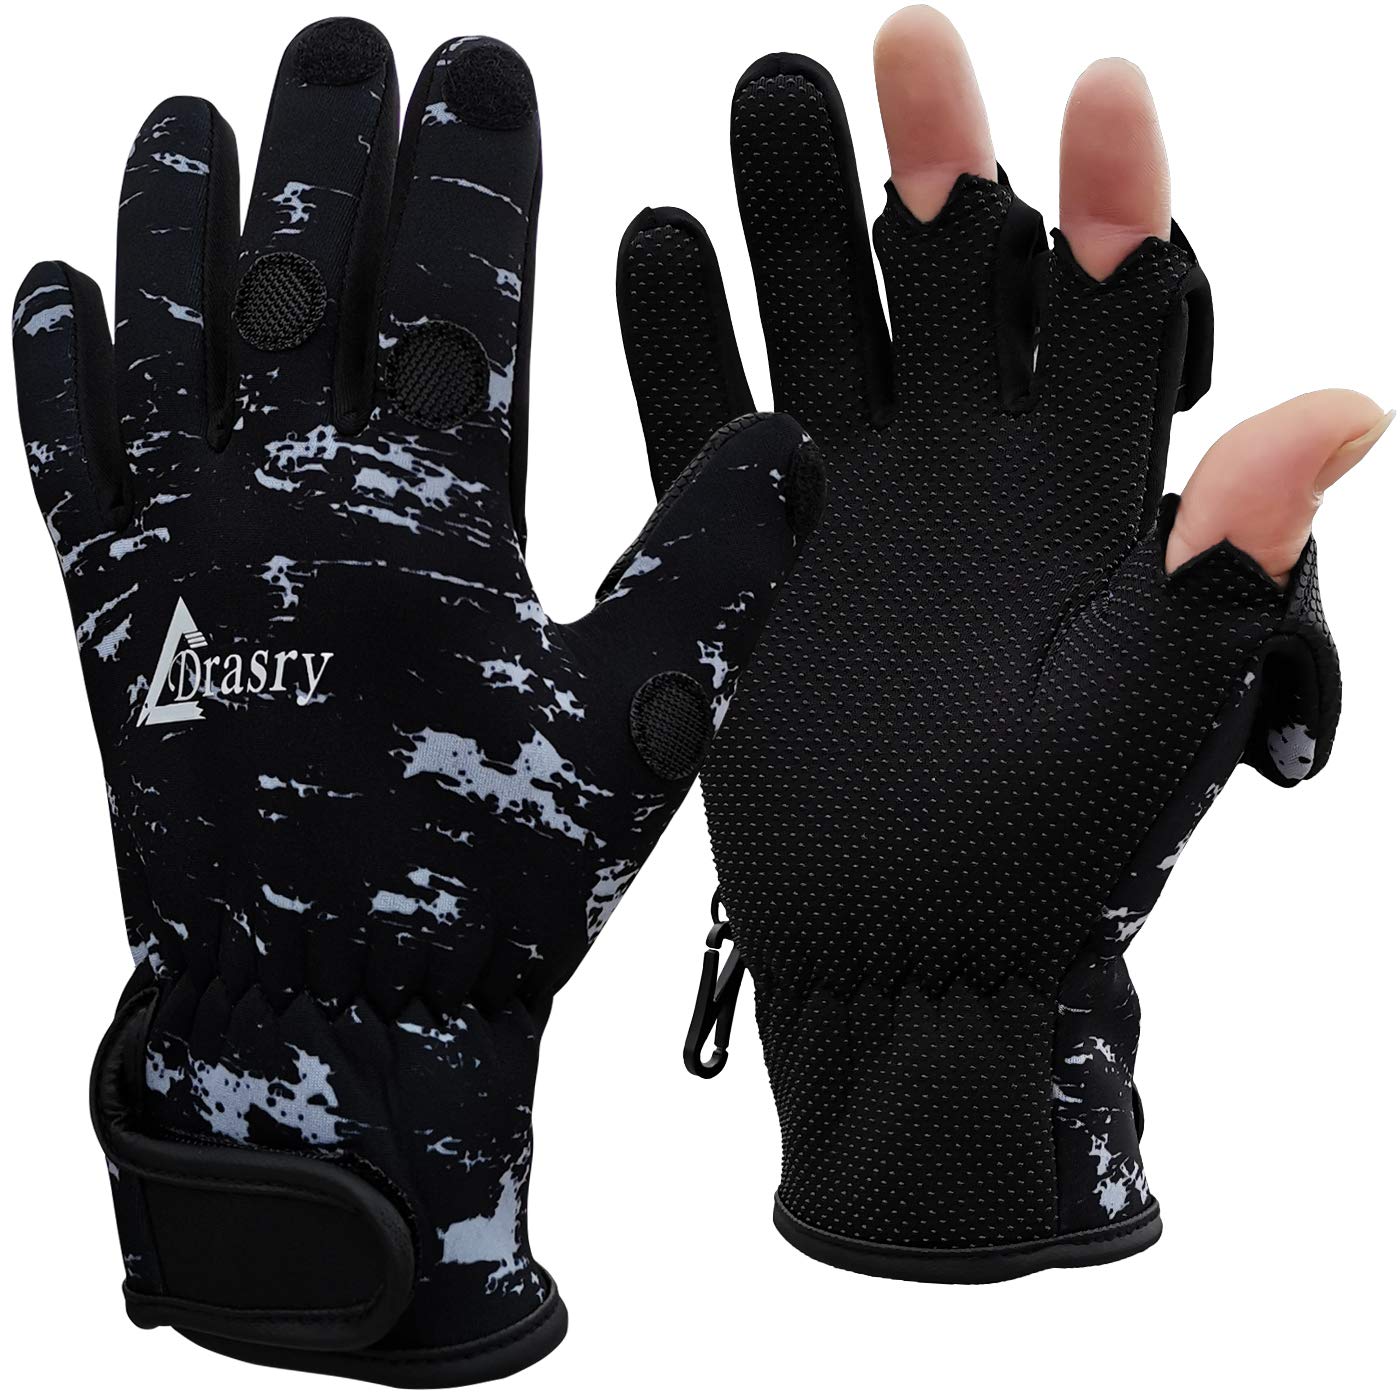 Drasry Neoprene Fishing Gloves Touchscreen 3 Cut Fingers Warm Cold Weather  Waterproof Suitable for Men and Women Ice Fishing Fly Fishing Photography  Motorcycle Running Shooting Black Medium